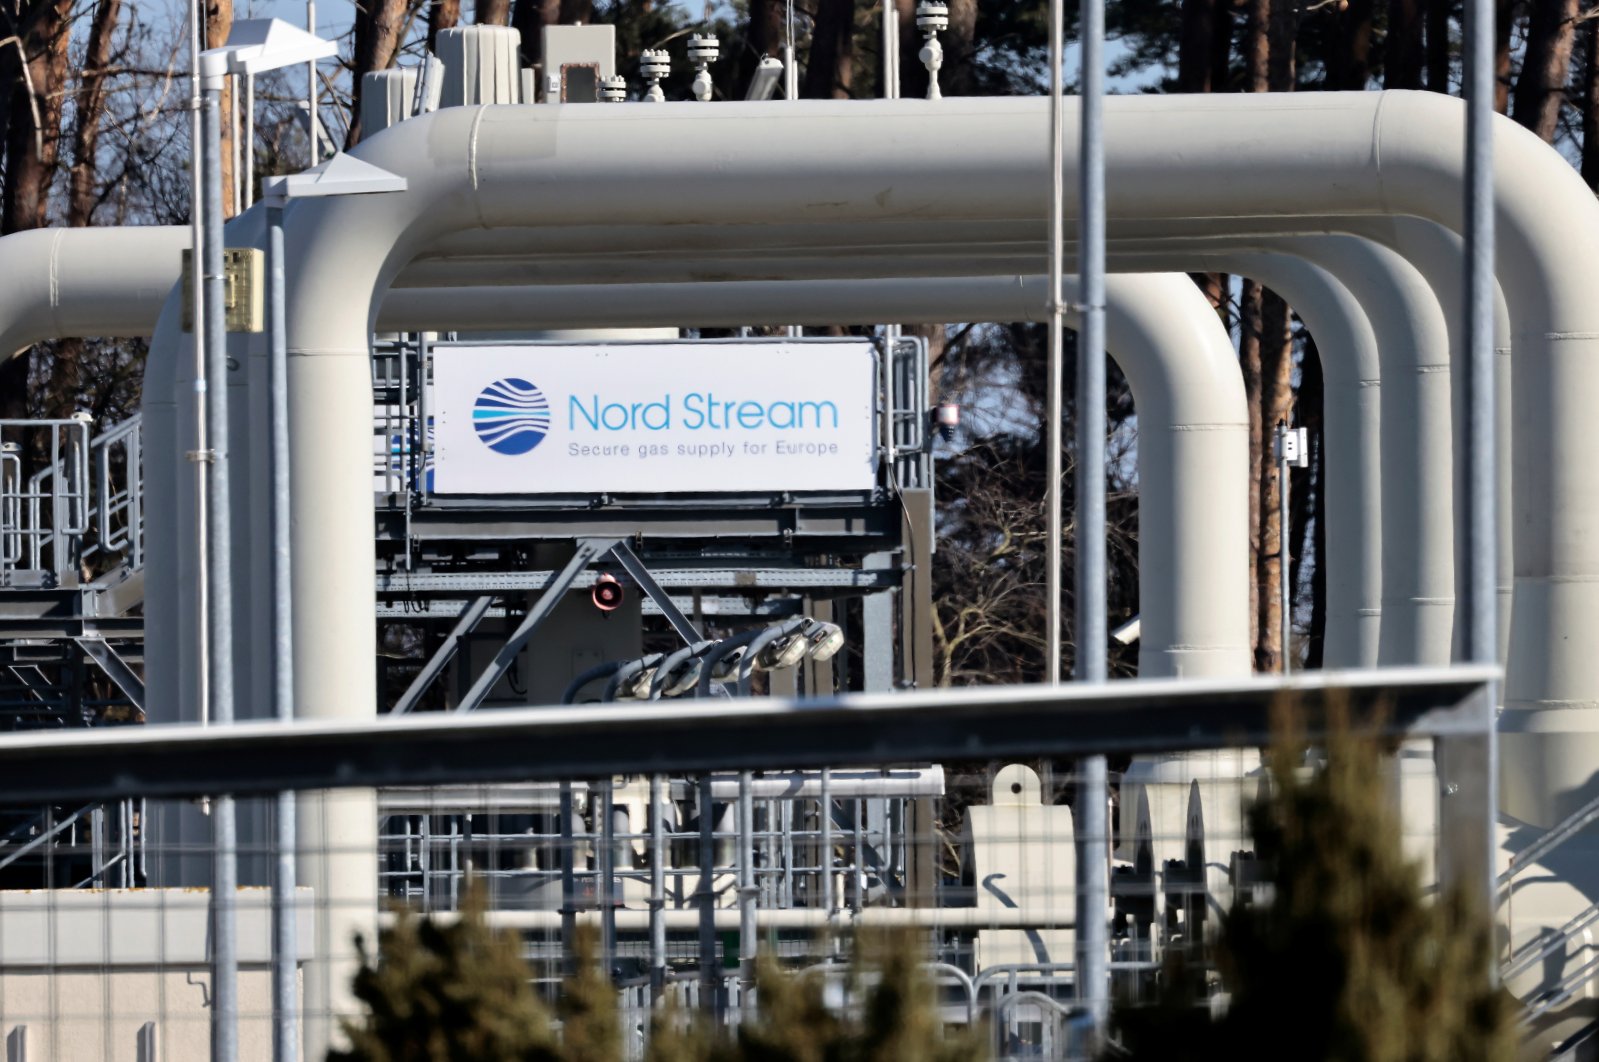 Pipes at the landfall facilities of the Nord Stream 1 gas pipeline are pictured in Lubmin, Germany, March 8, 2022. (Reuters Photo)